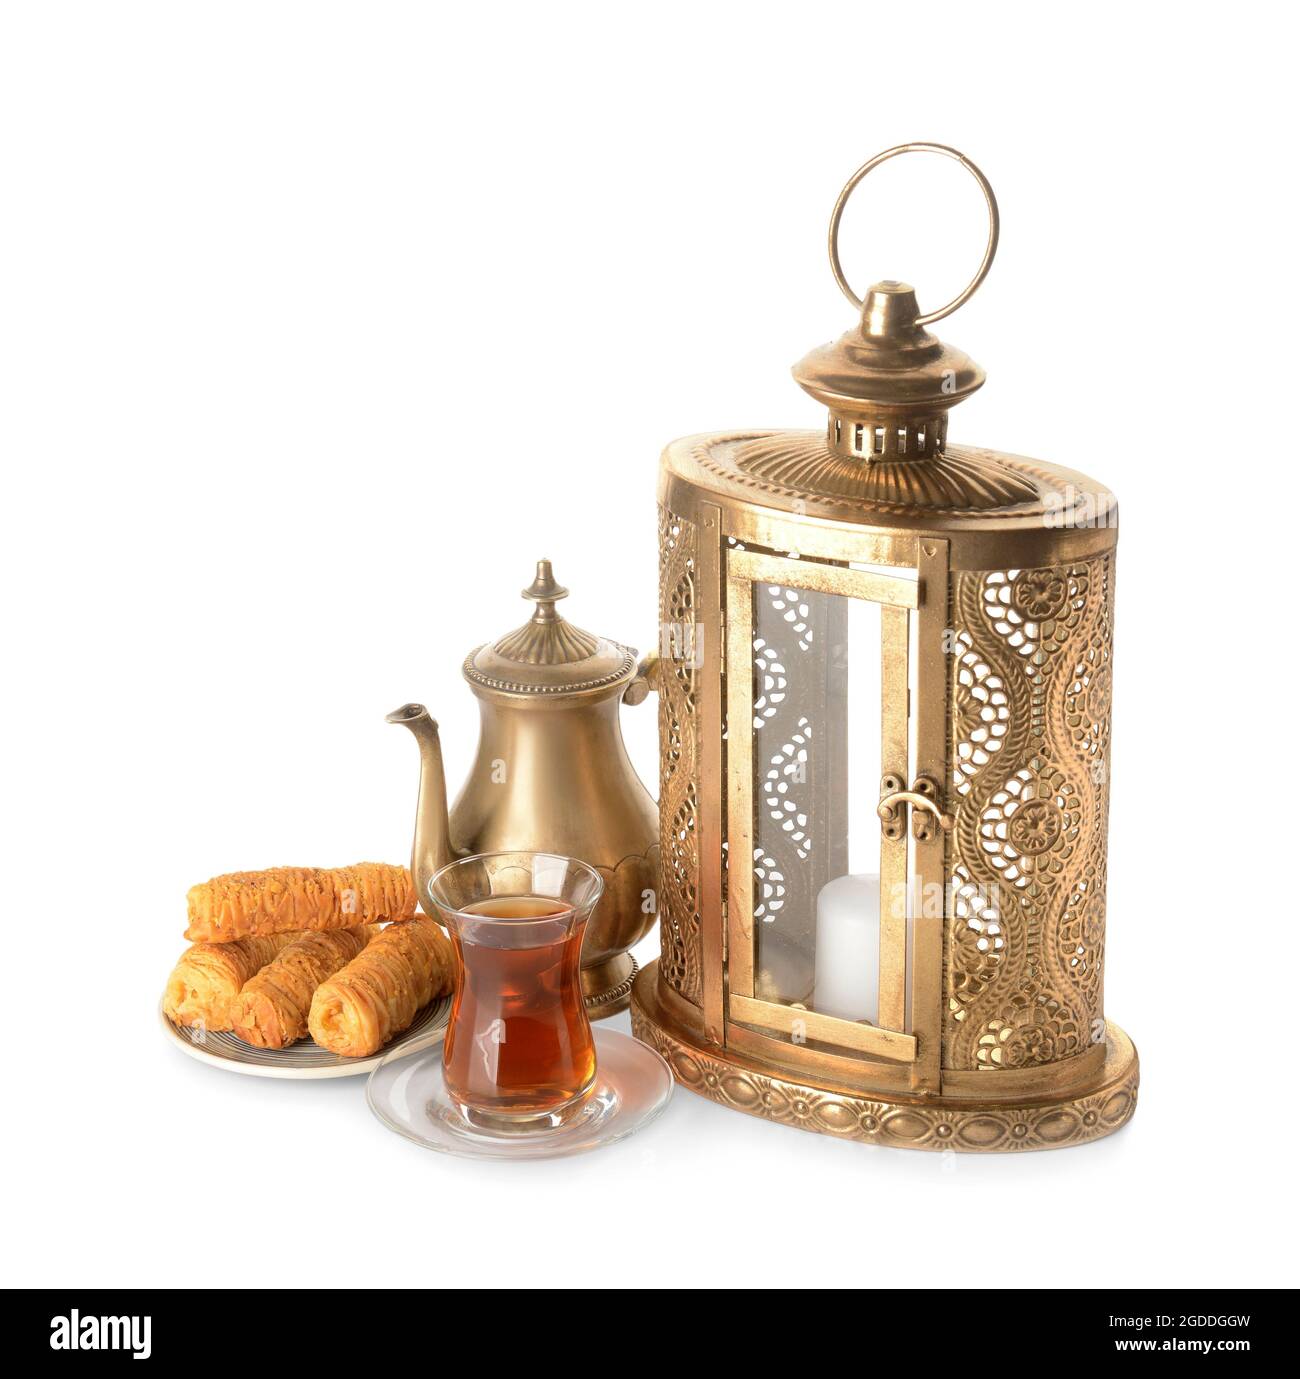 Muslim lantern with Turkish sweets and tea on white background Stock Photo